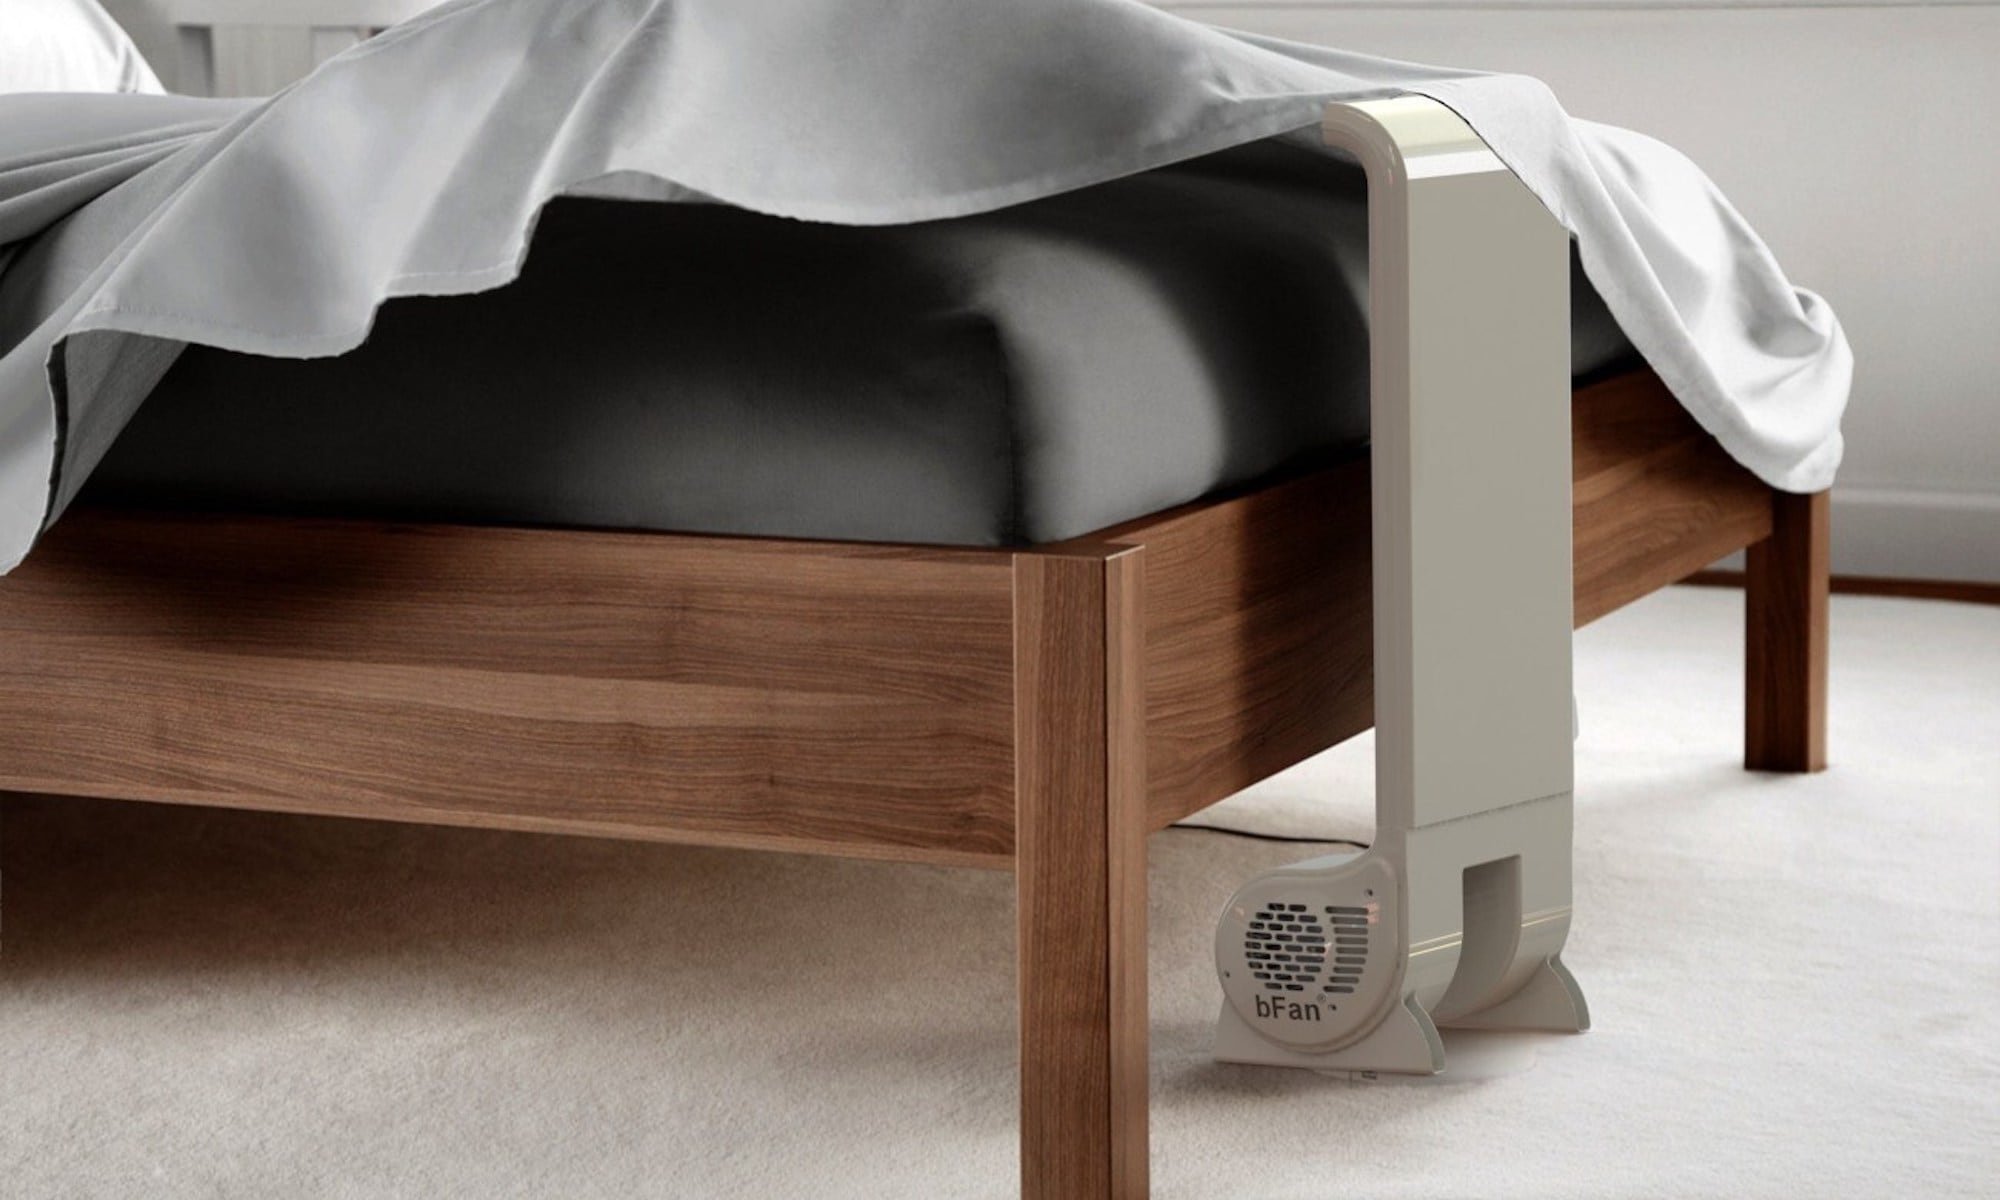 Smart bedtime gadgets guide for a better night’s sleep